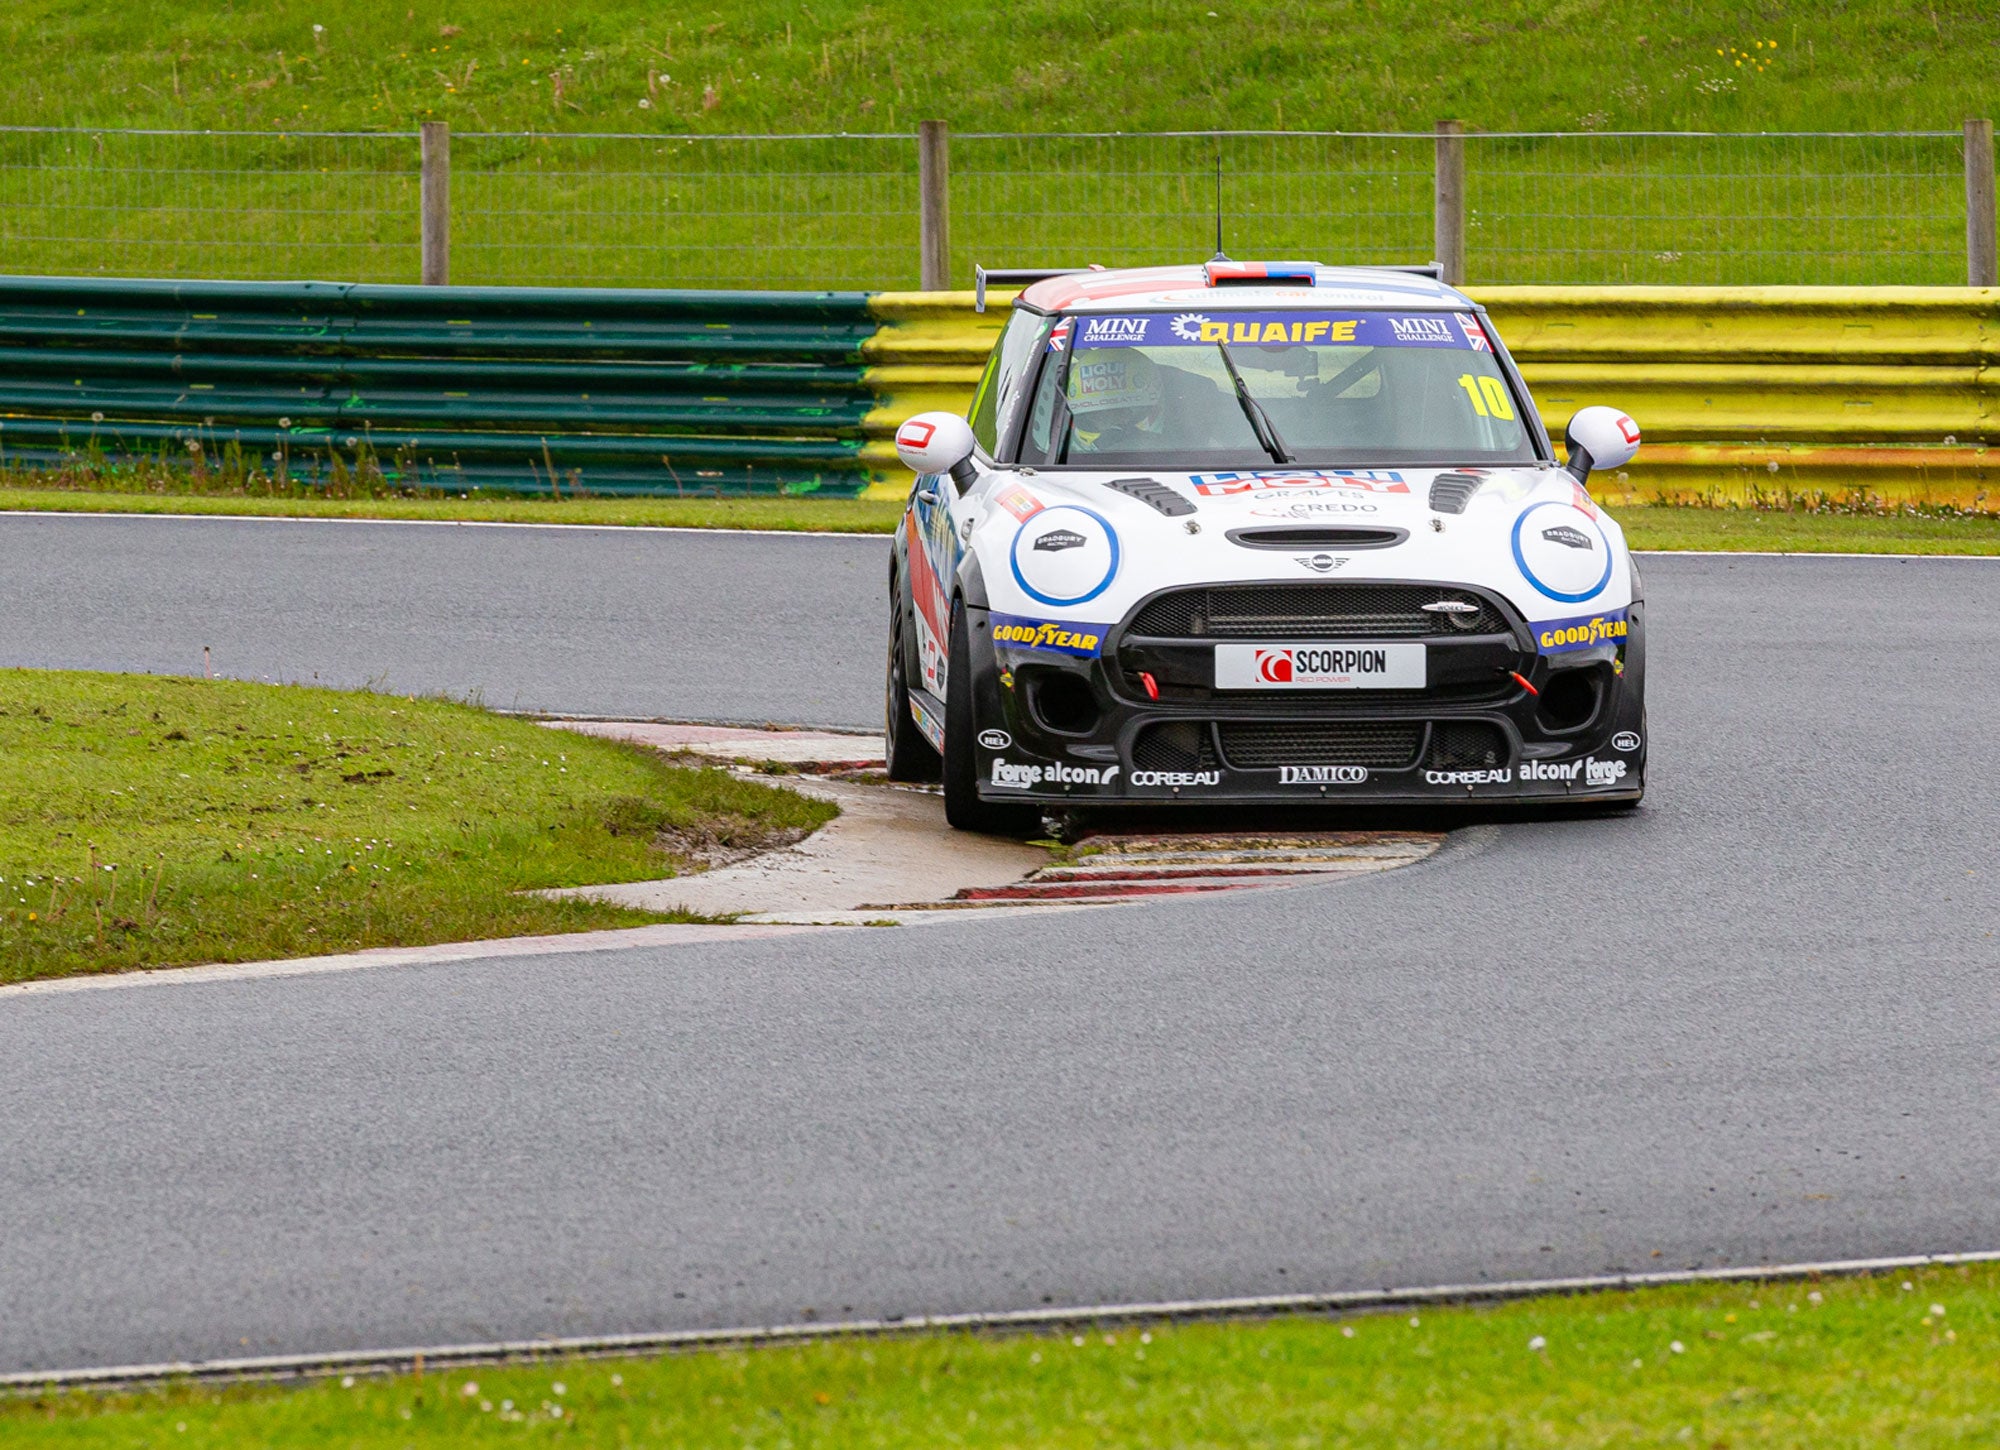 Bradley Gravett son of BTCC British Touring Car Champion Robb Gravett in the MINI Challenge JCW Series at Croft in 2021 Tyre Test Complex Right Graves Motorsport Cooper Racing Driver LIQUI MOLY LM Performance Thinking it Better